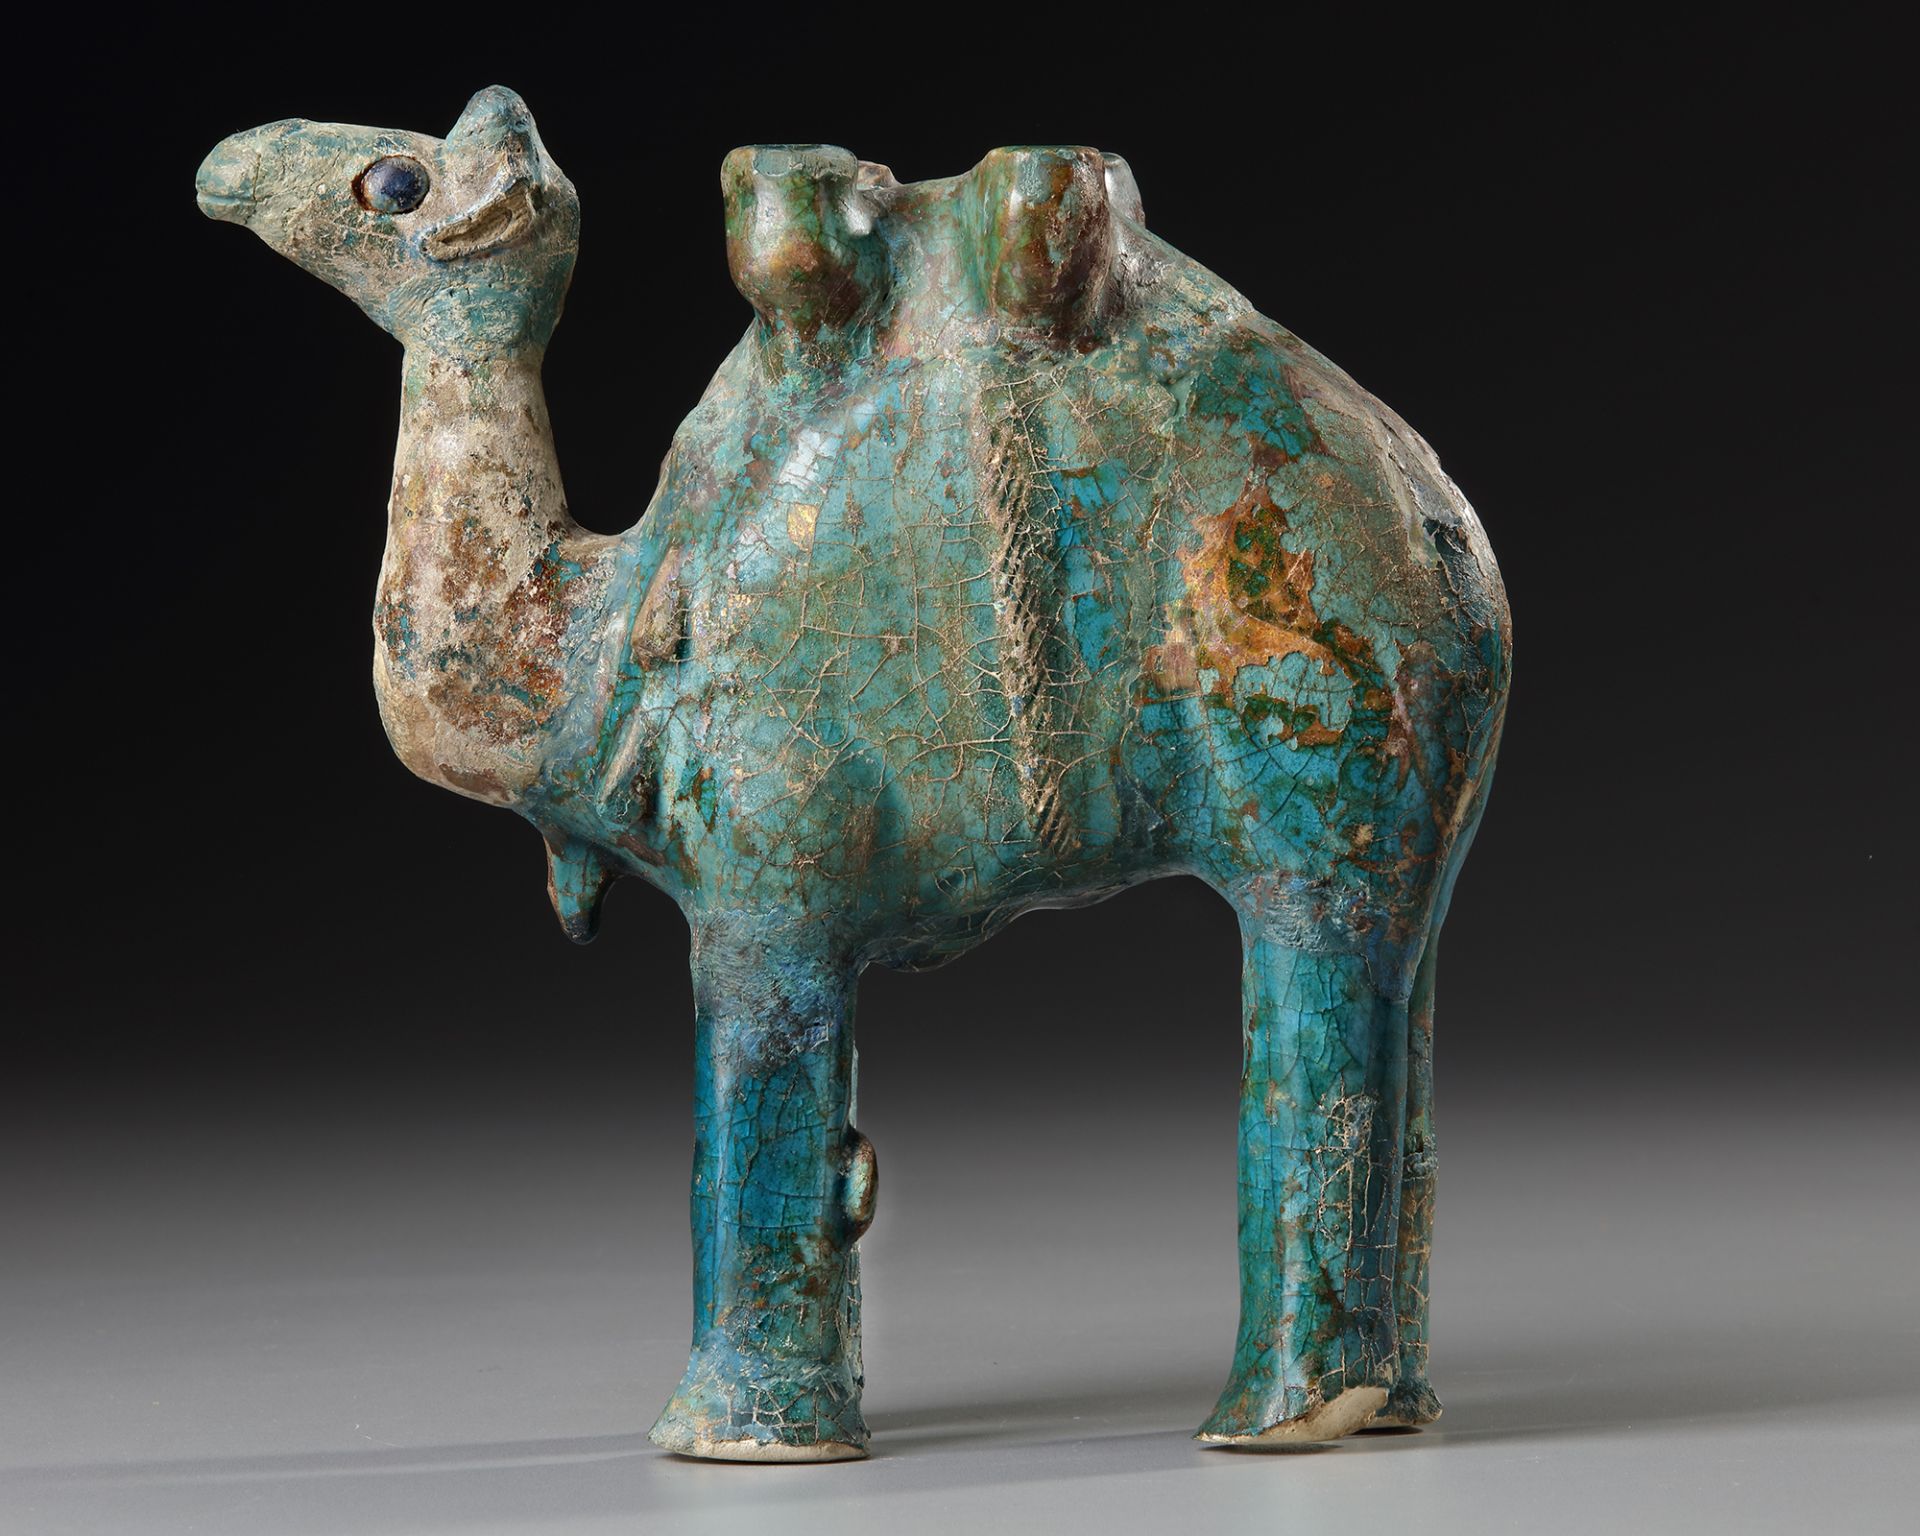 A TURQUOISE GLAZED POTTERY FIGURE OF A CAMEL, KASHAN, PERSIA, 11TH-12TH CENTURY - Image 4 of 8